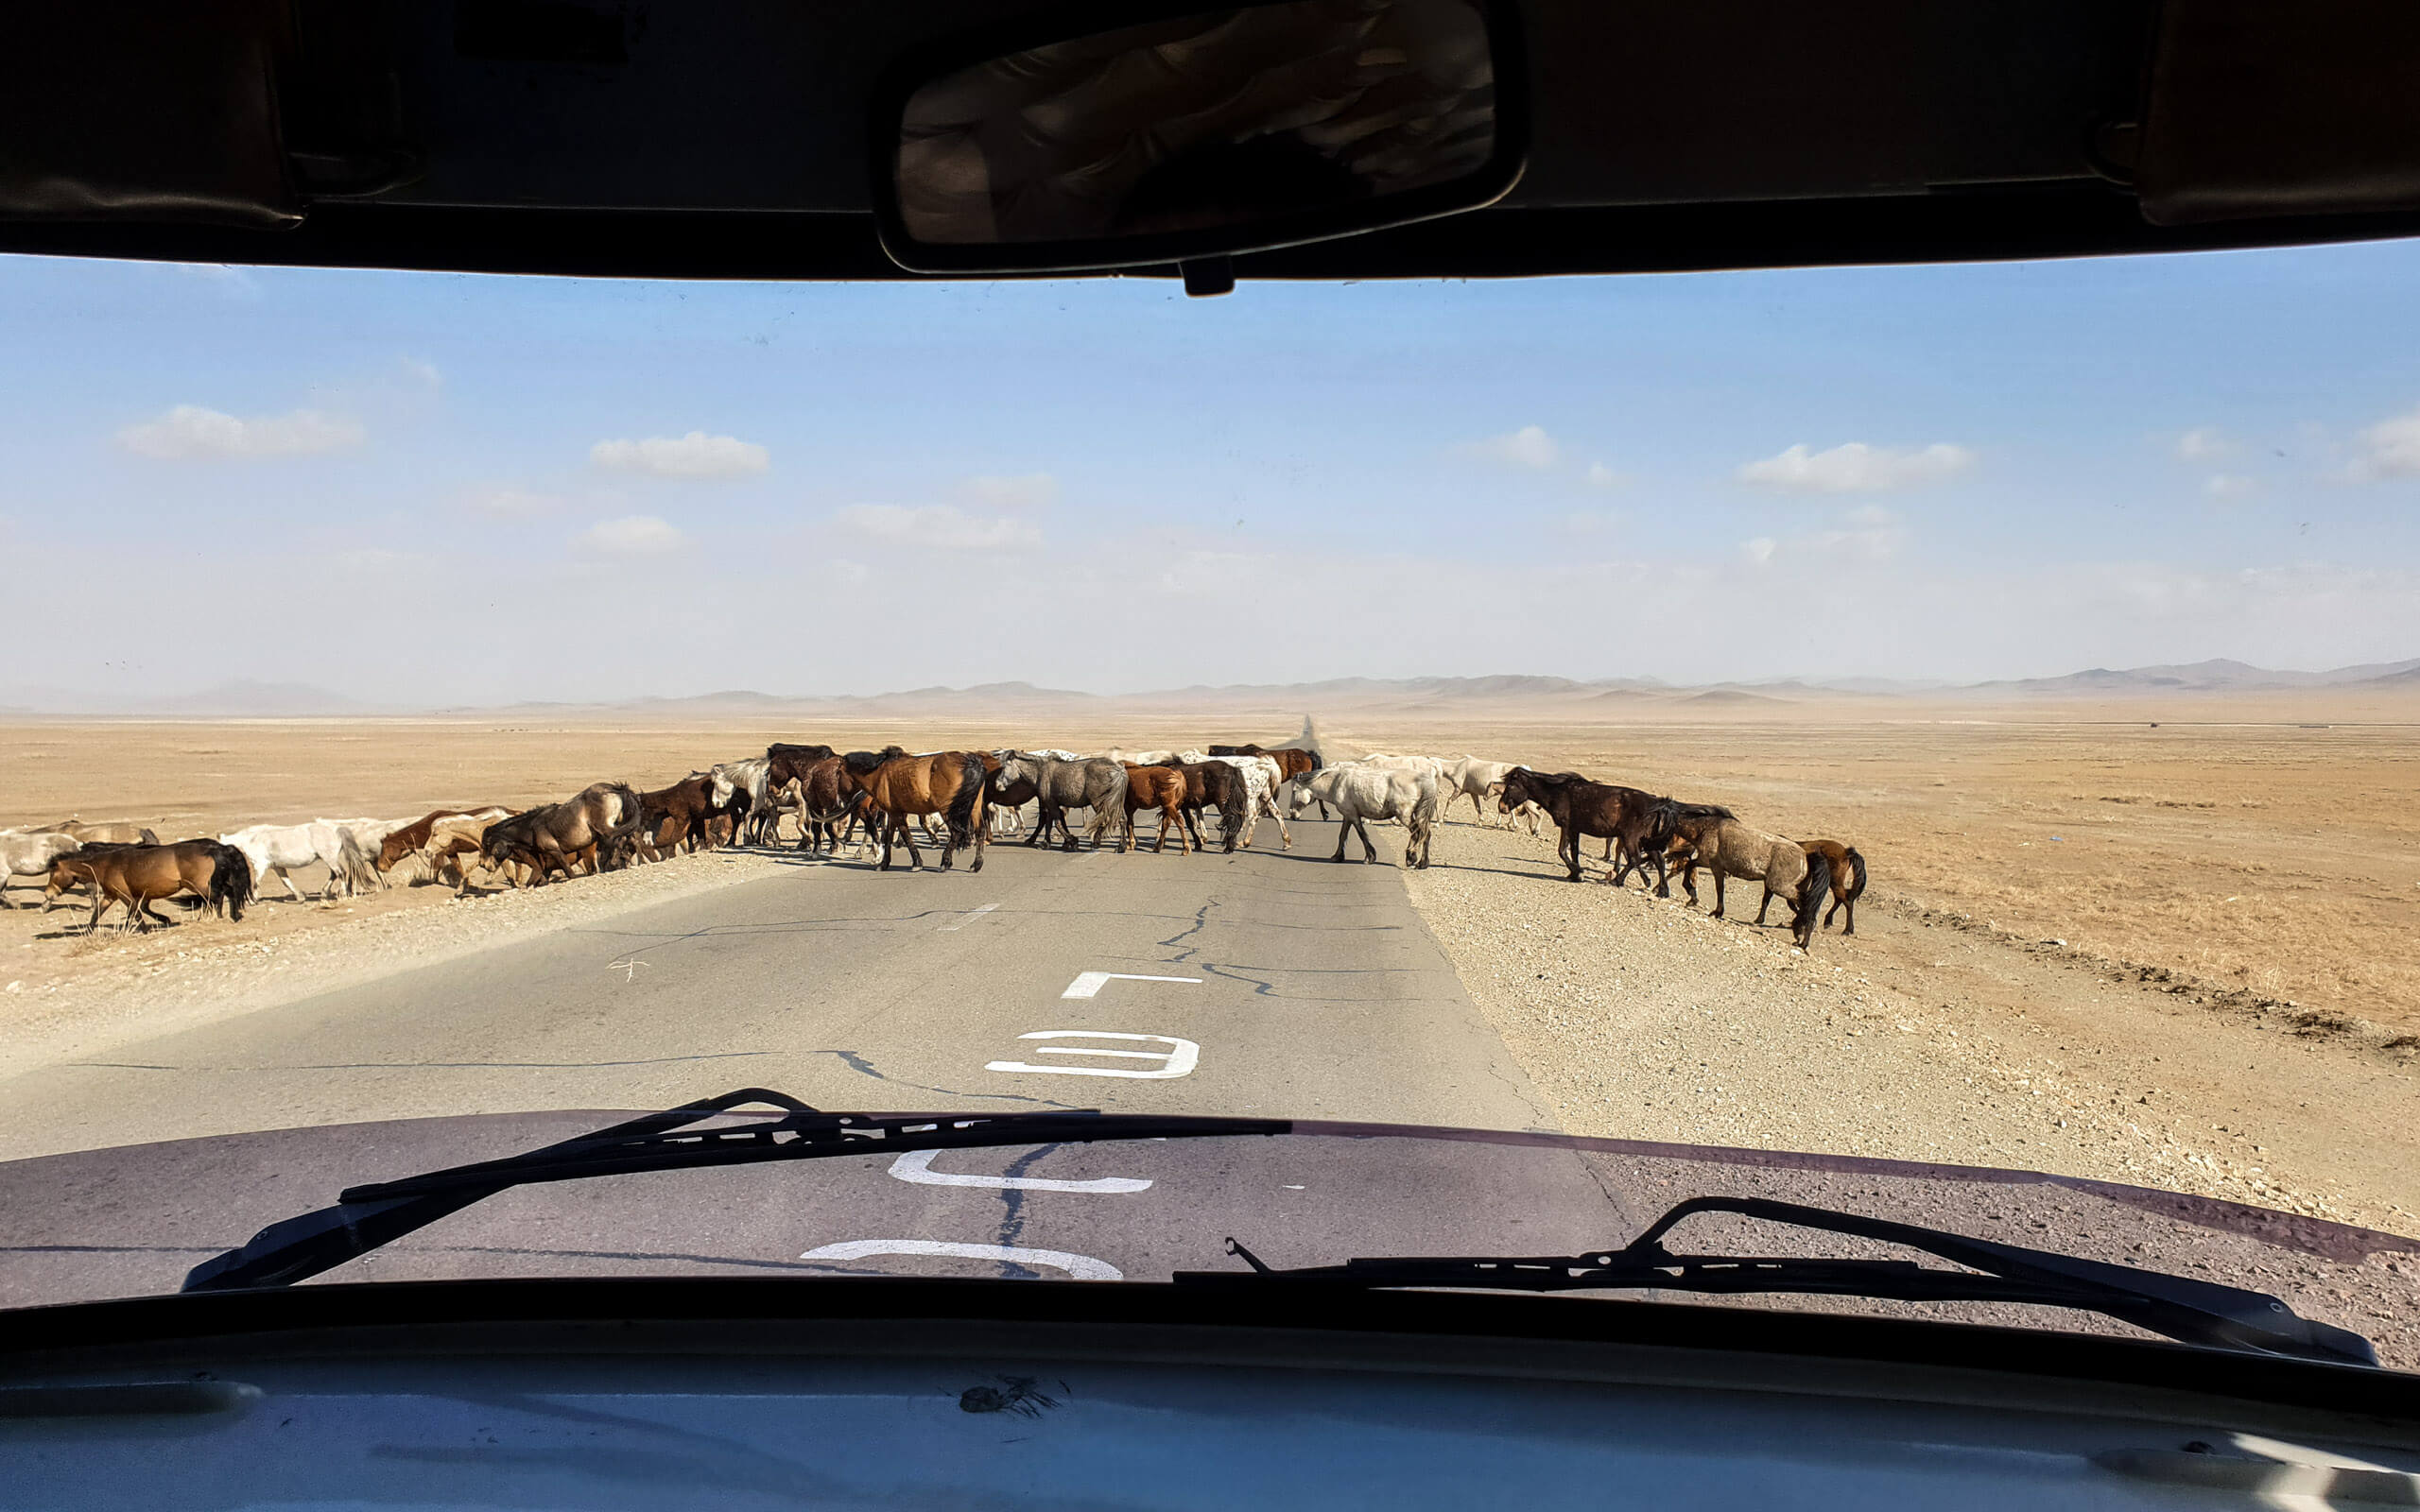 Horses crossing the road in Mongolia